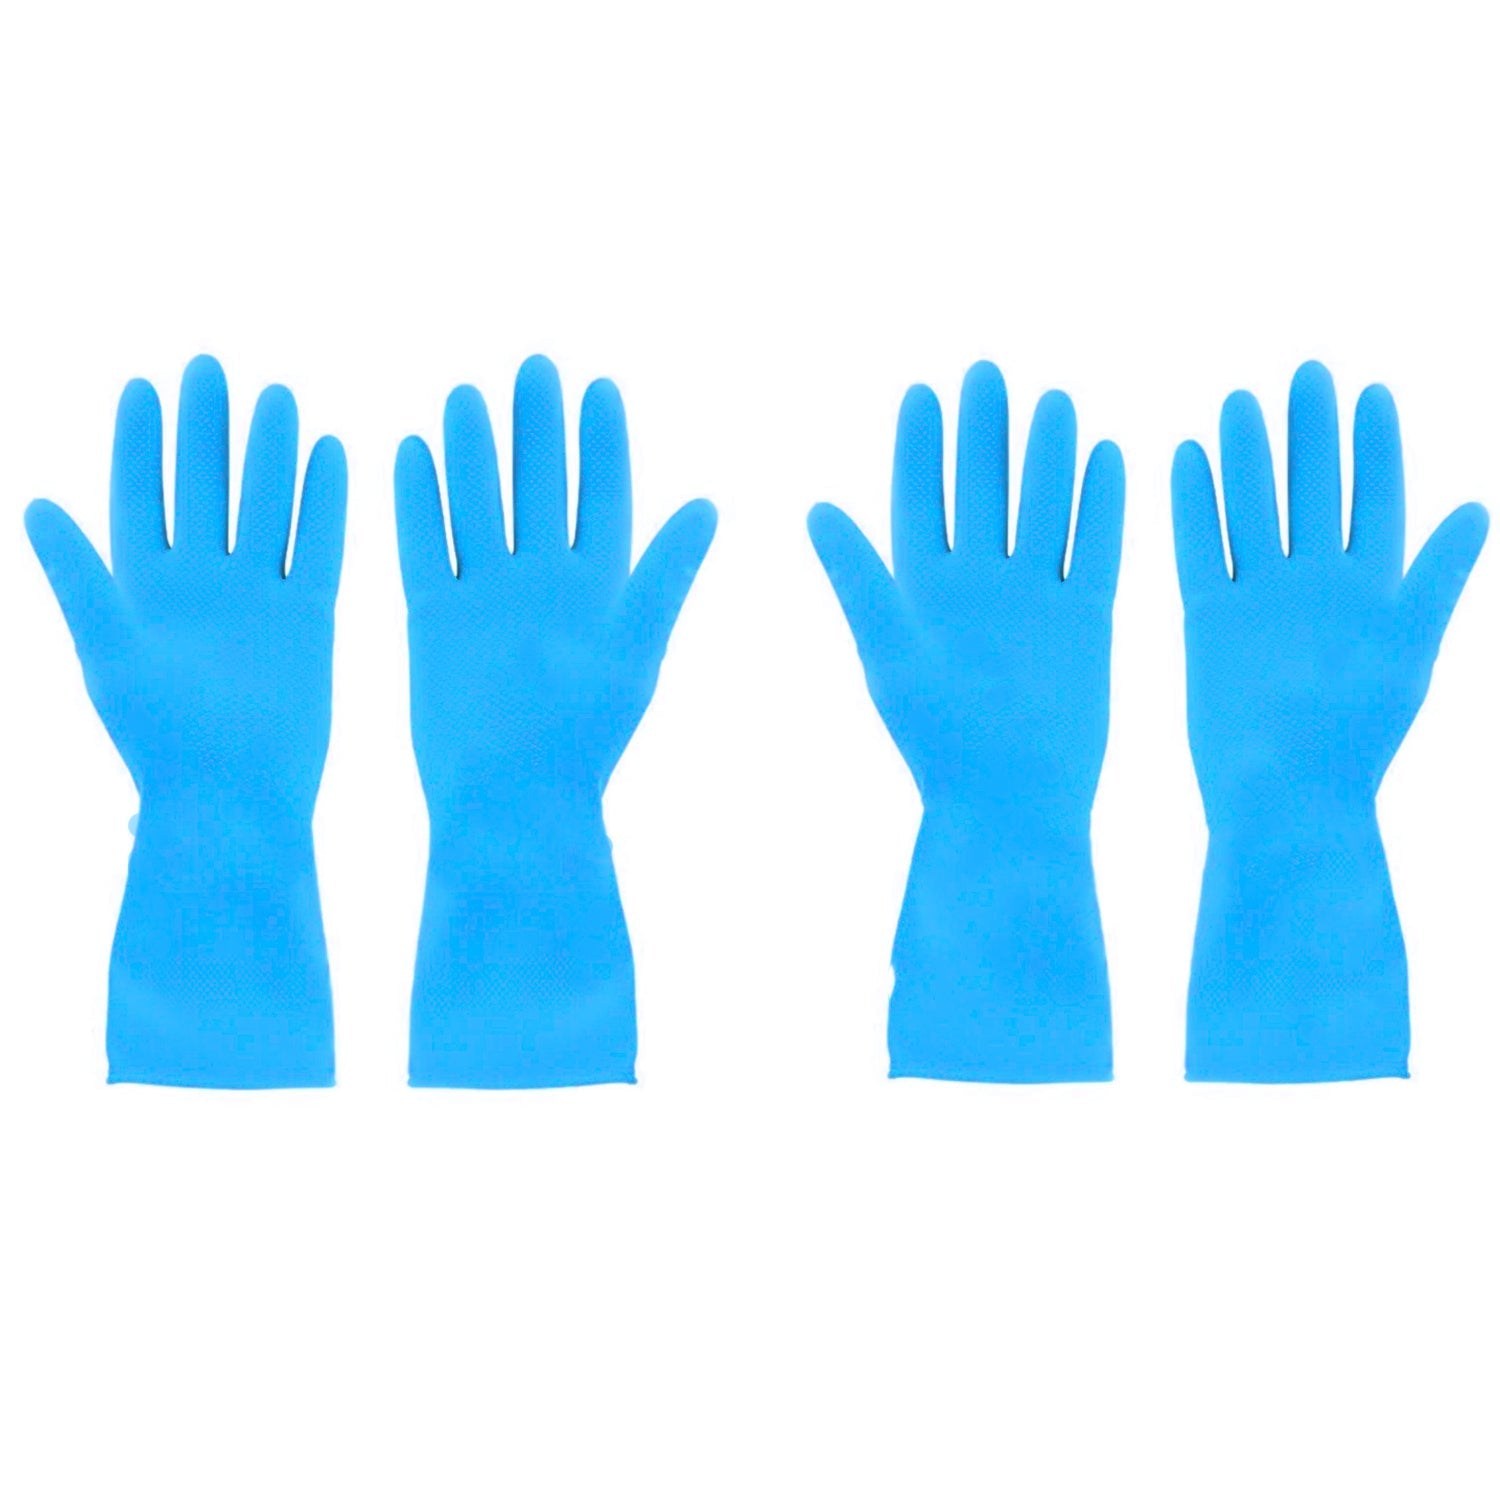 4855 2 Pair Large Blue Gloves For Different Types Of Purposes Like Washing Utensils, Gardening And Cleaning Toilet Etc. Dukandaily